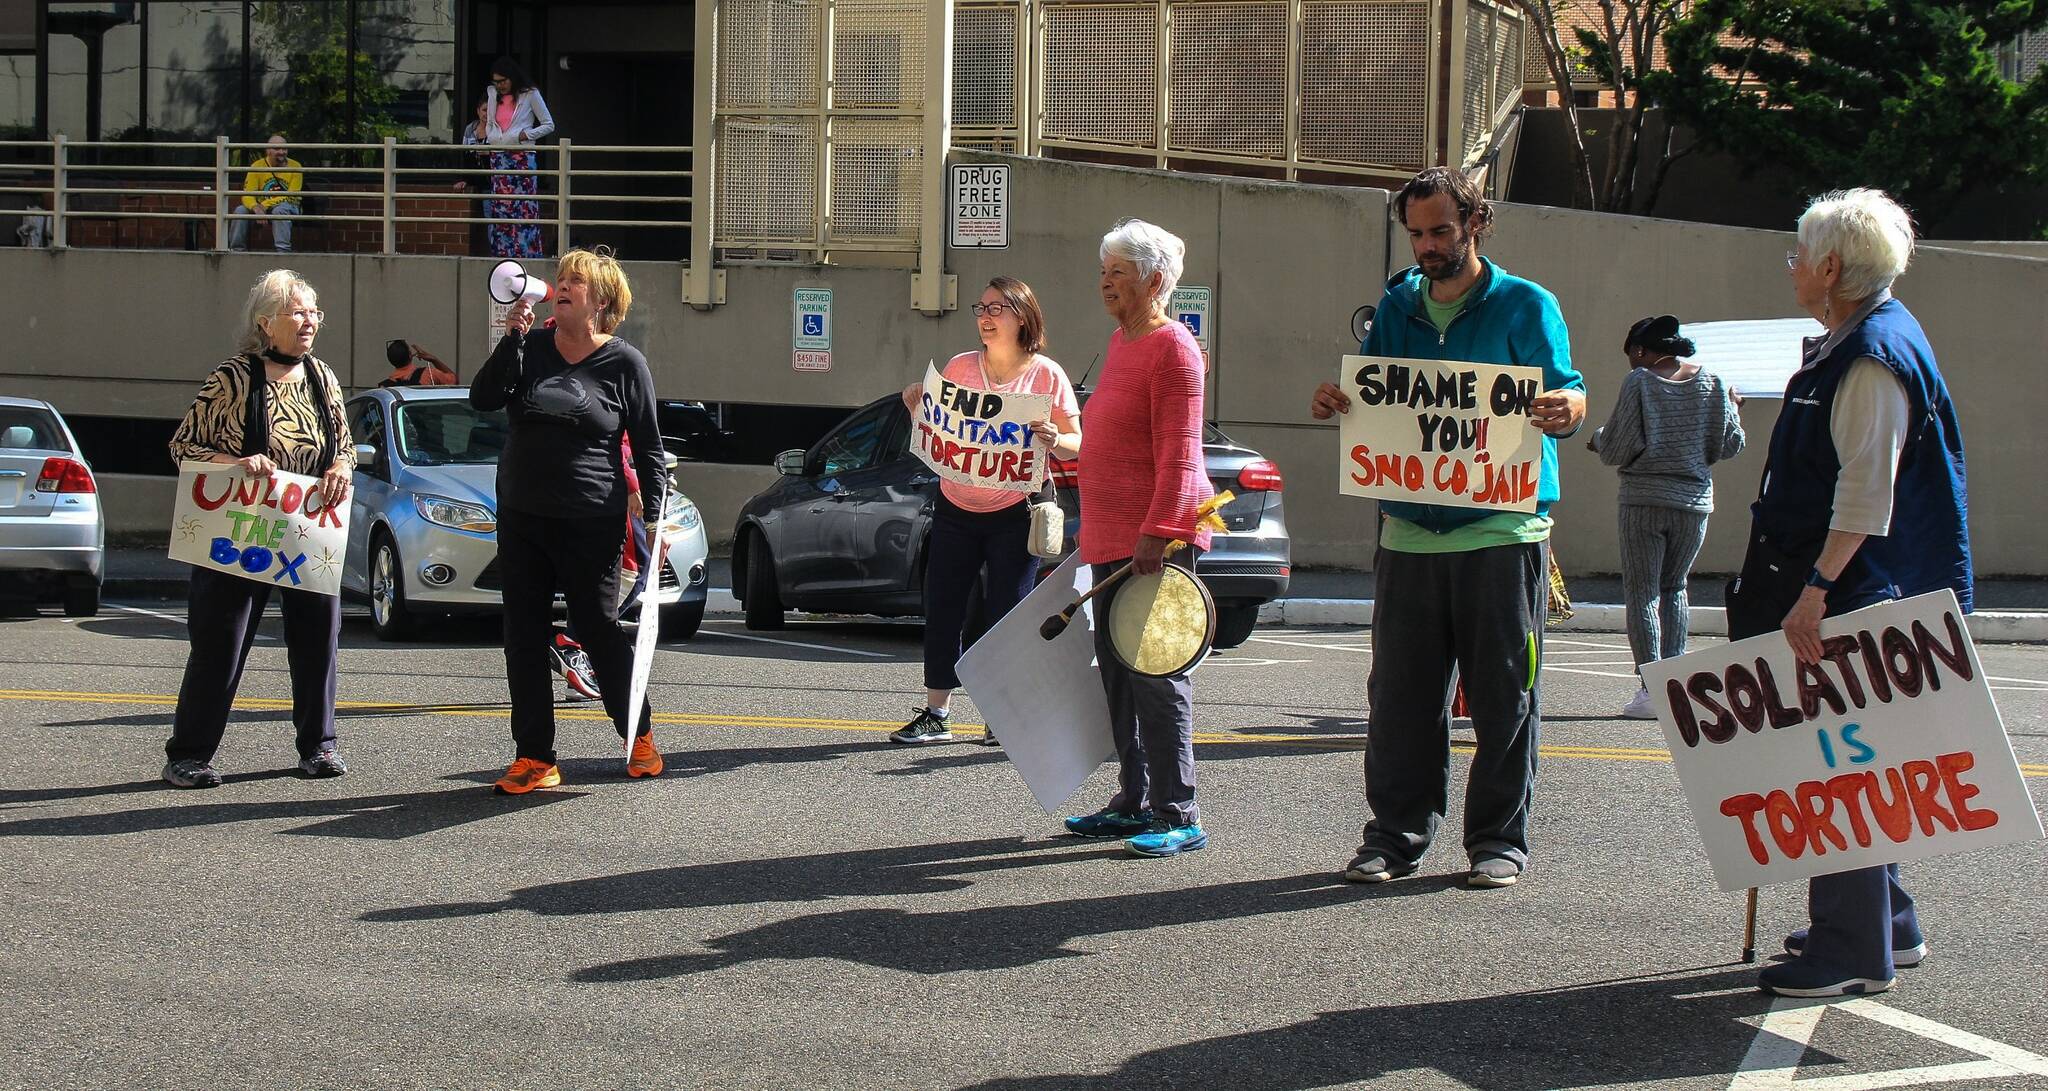 Photo by Luisa Loi/Whidbey News-Times
The small group of protesters was joined by a few passersby, some of which said had experienced solitary confinement first-hand.